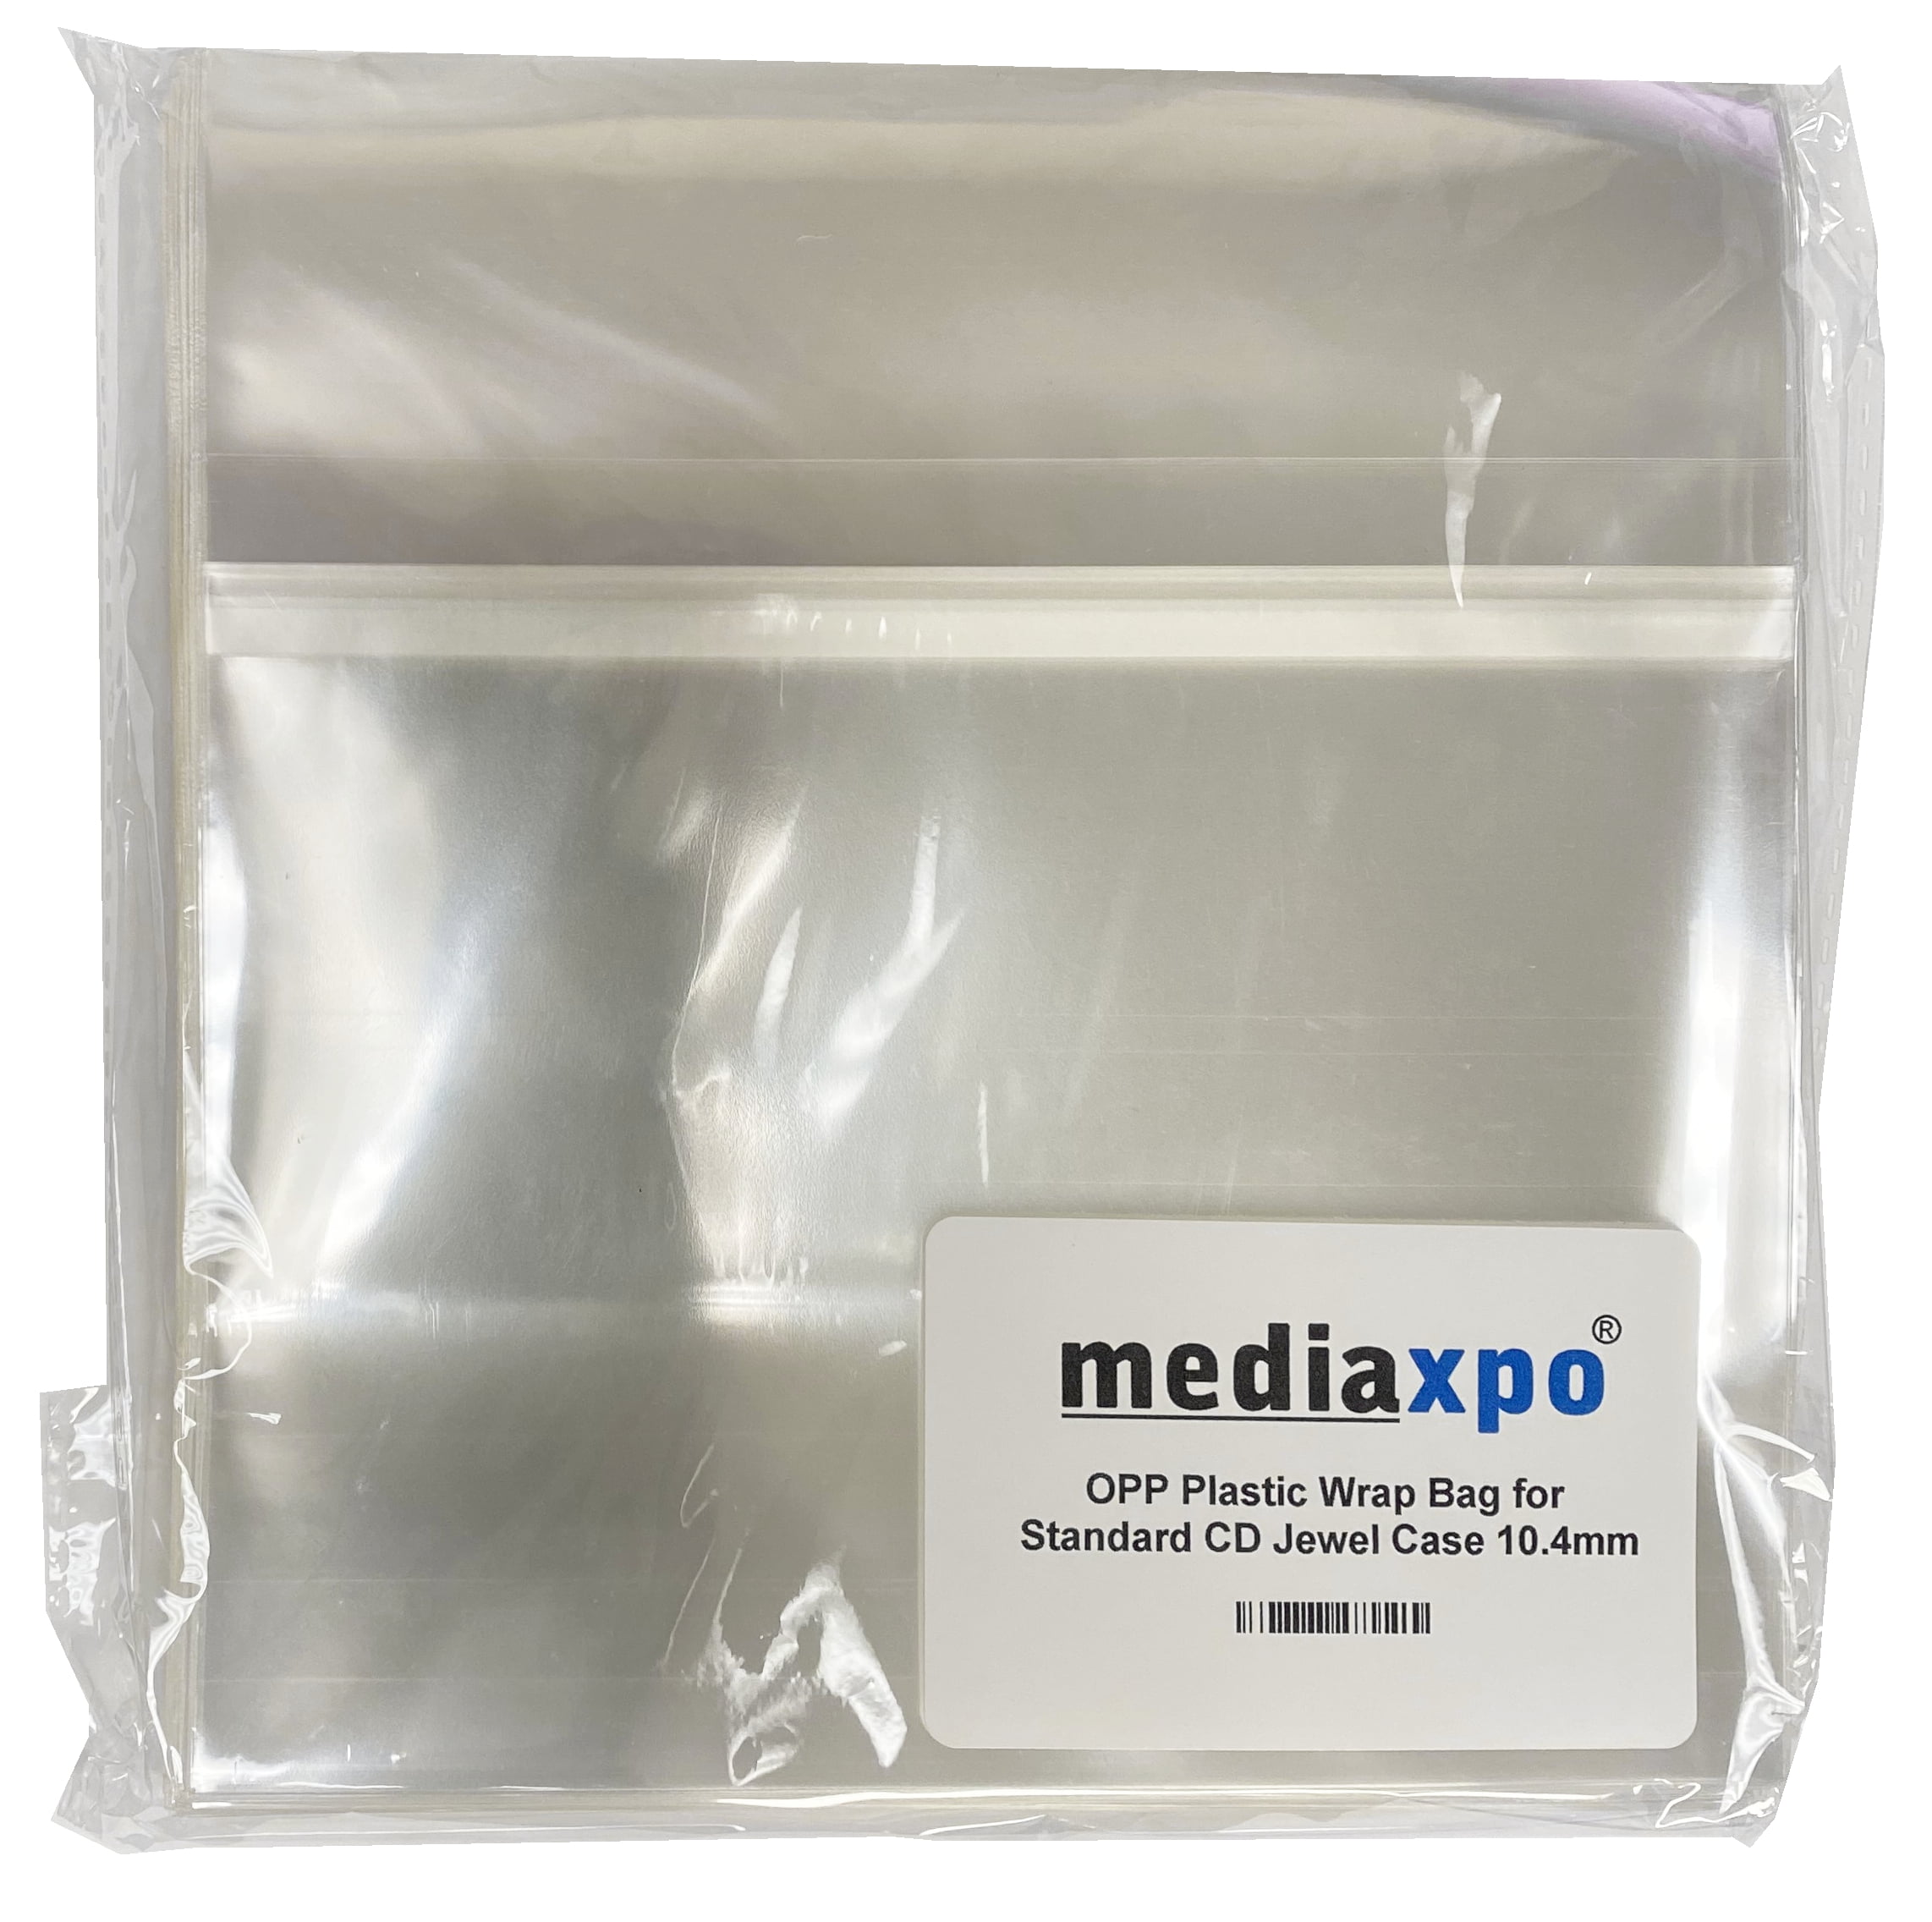 NEW 200 OPP Resealable Plastic Wrap Bags for Standard 5.2mm CD Slim Jewel Case 